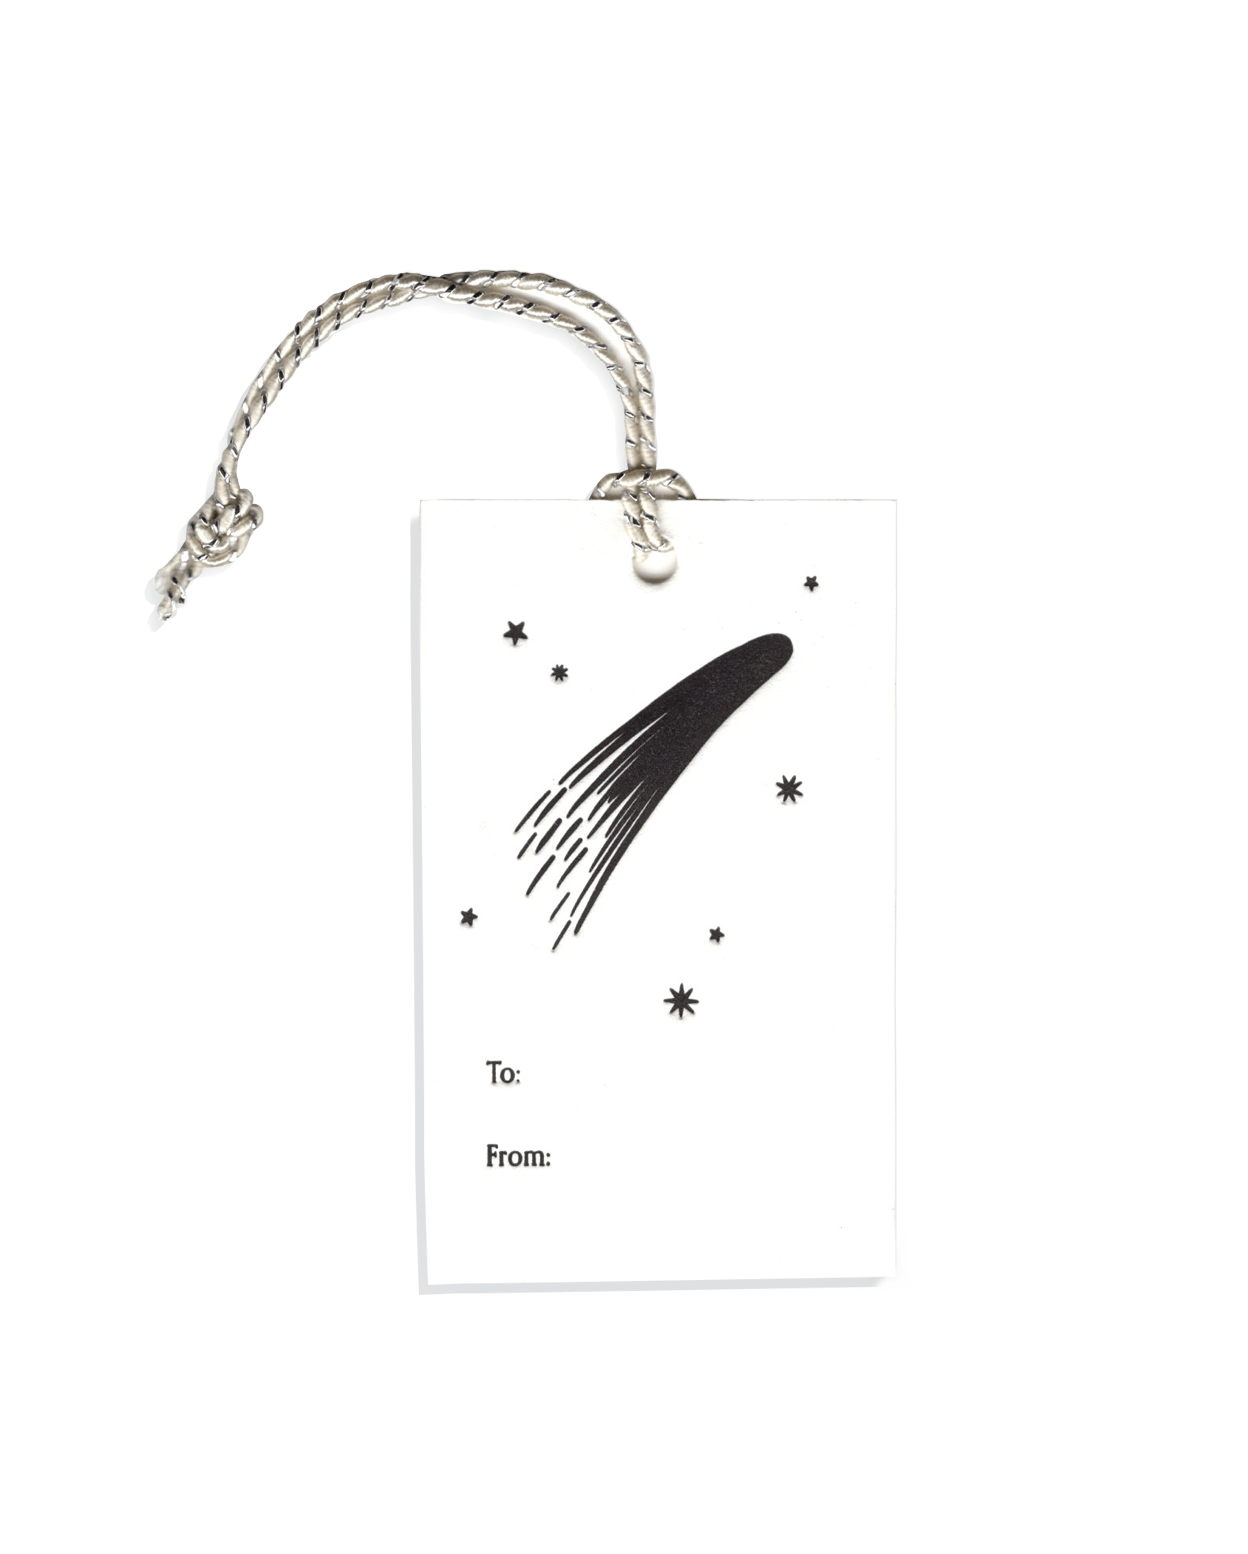 A single letterpressed gift tag with black comets, stars, and the words &quot;to&quot; and &quot;from&quot; in black ink on cream card stock with a silver tie on top.